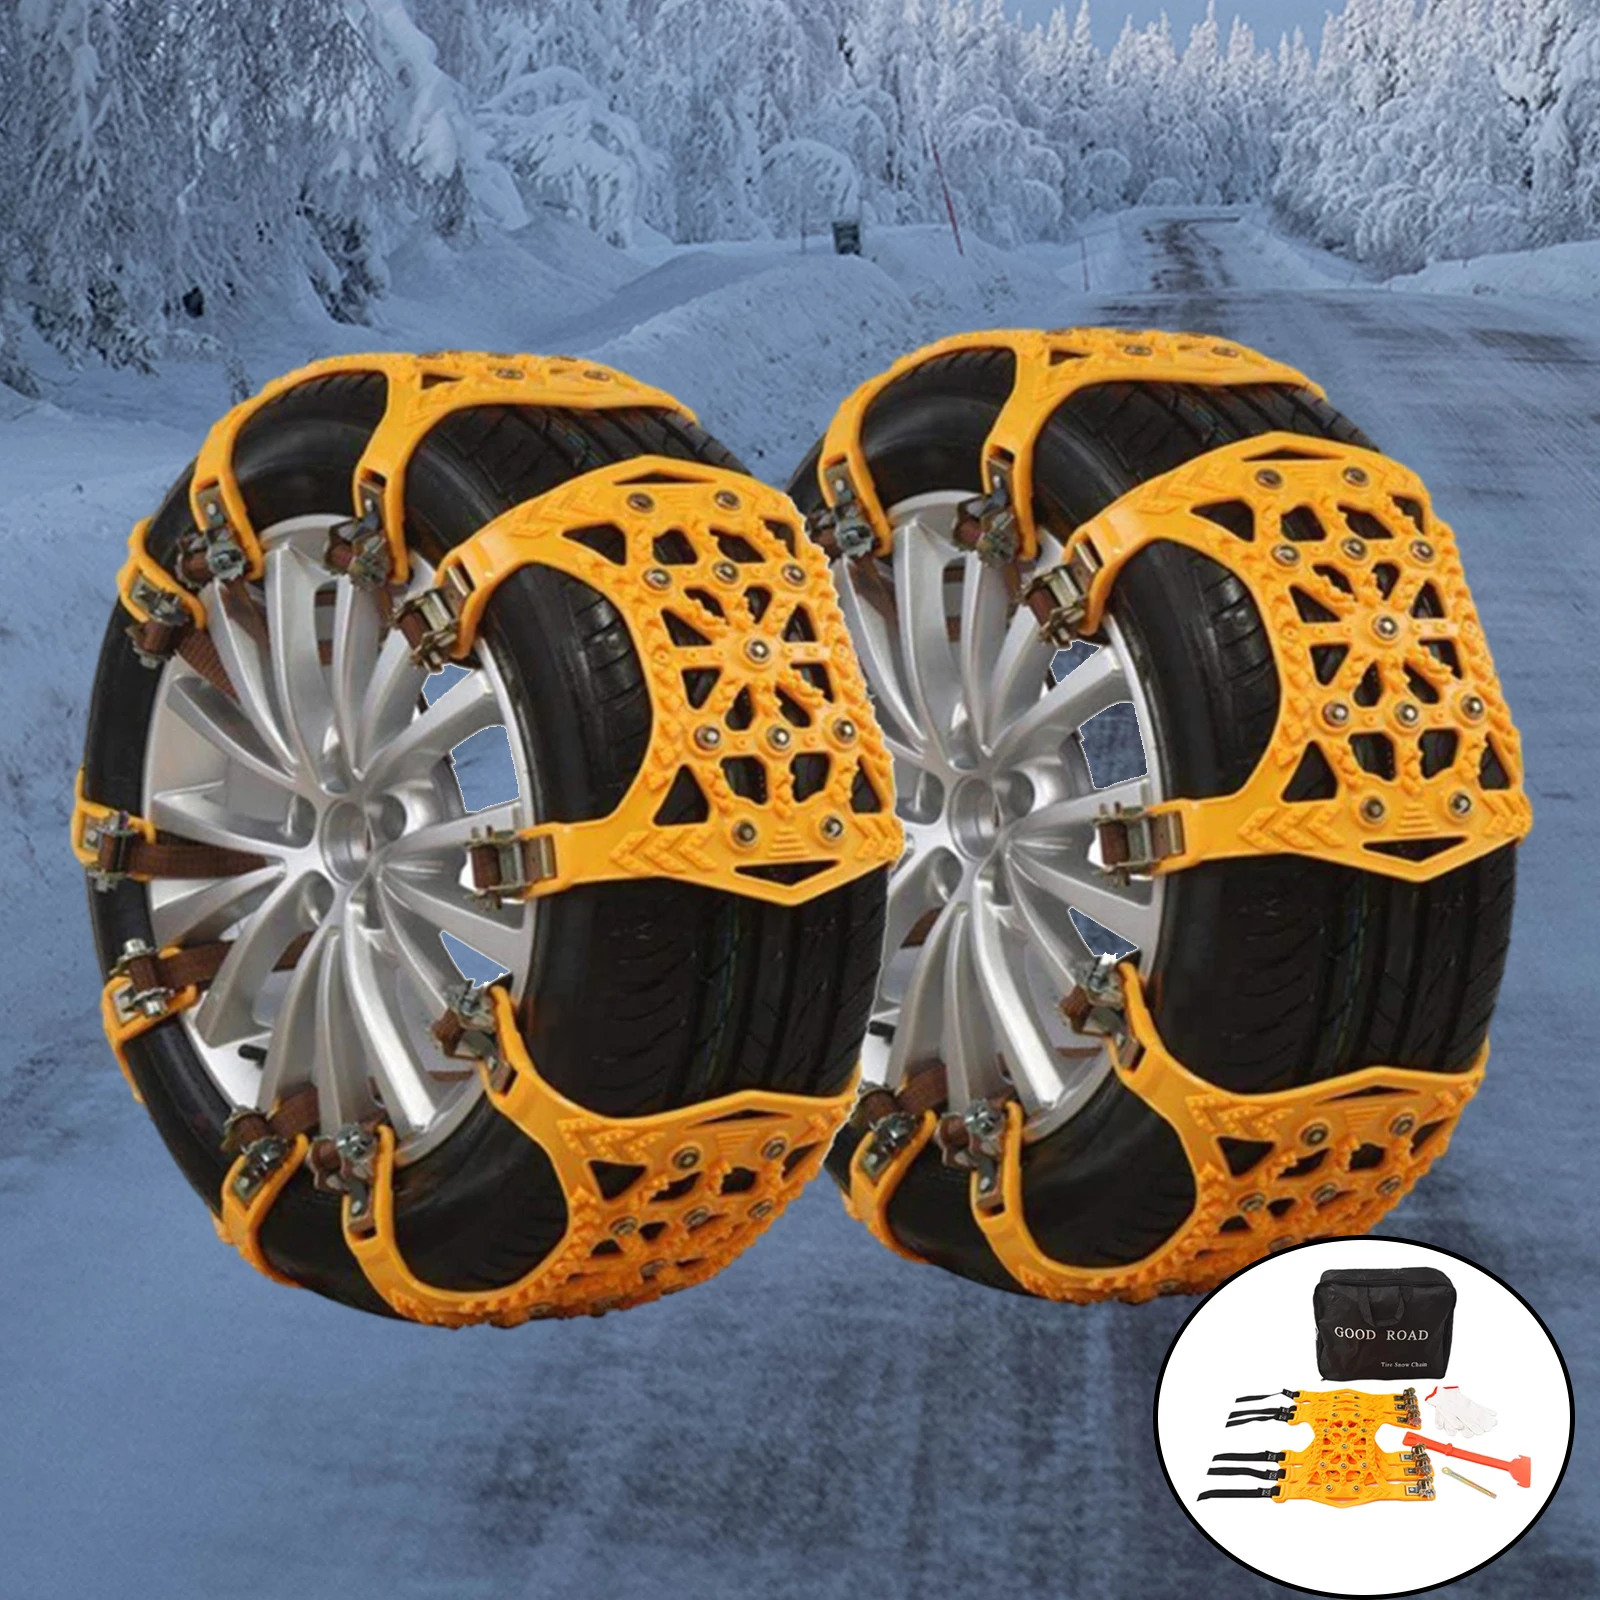 6Pcs Anti-Skid Anti Snow Chains of Car, Applicable Tire Width 165-265mm for Emergency